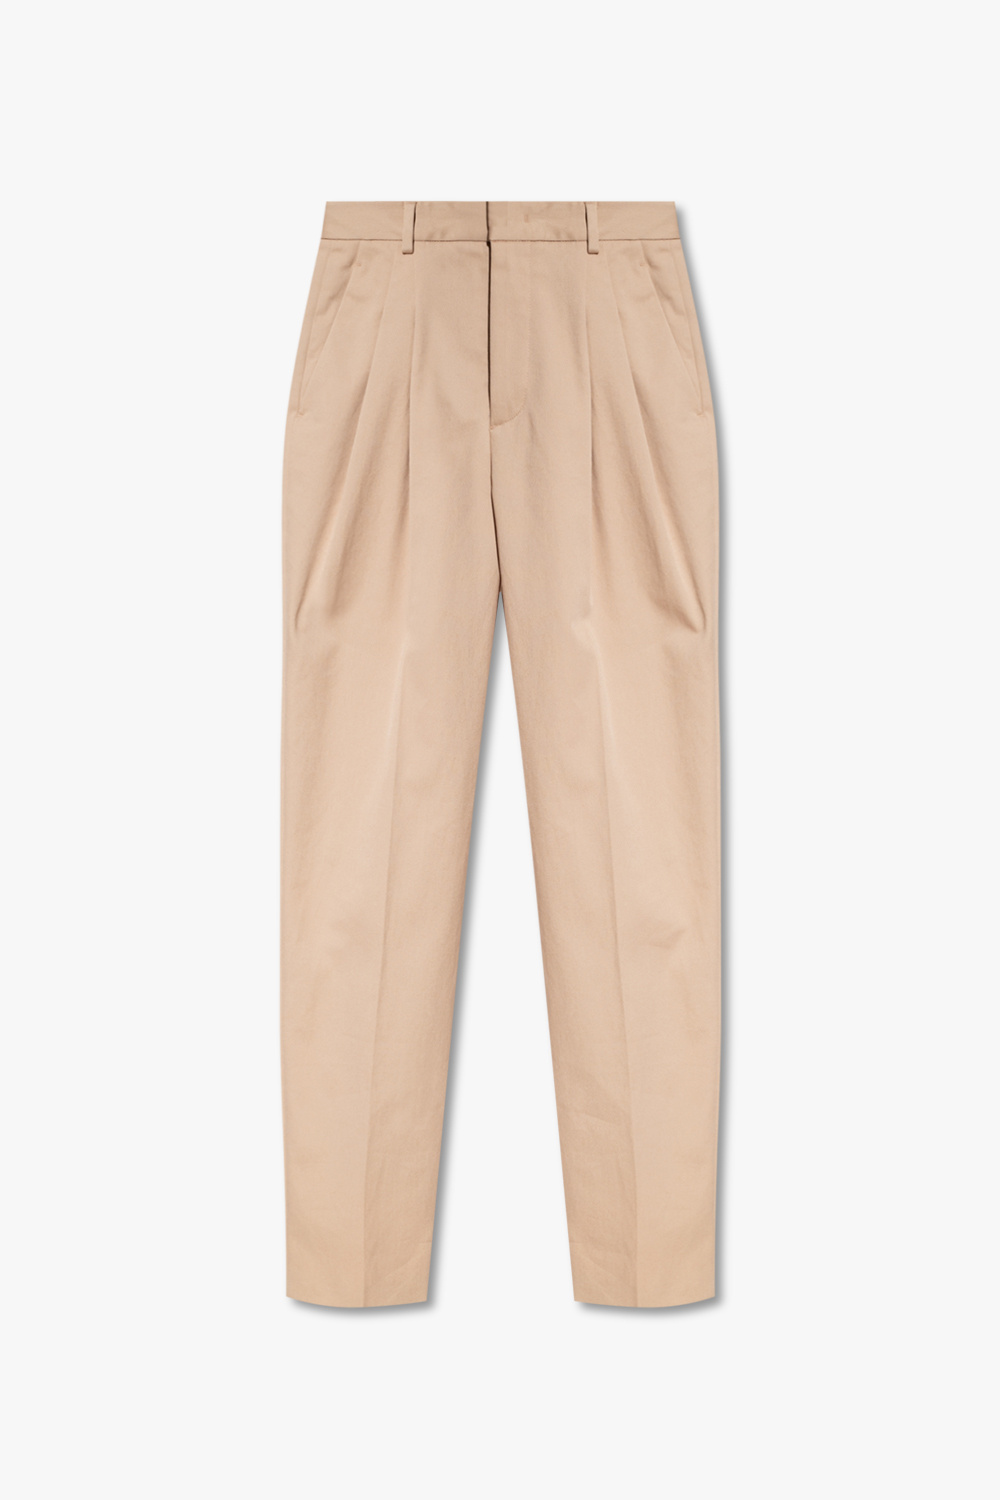 Red Valentino Pleat-front printed trousers